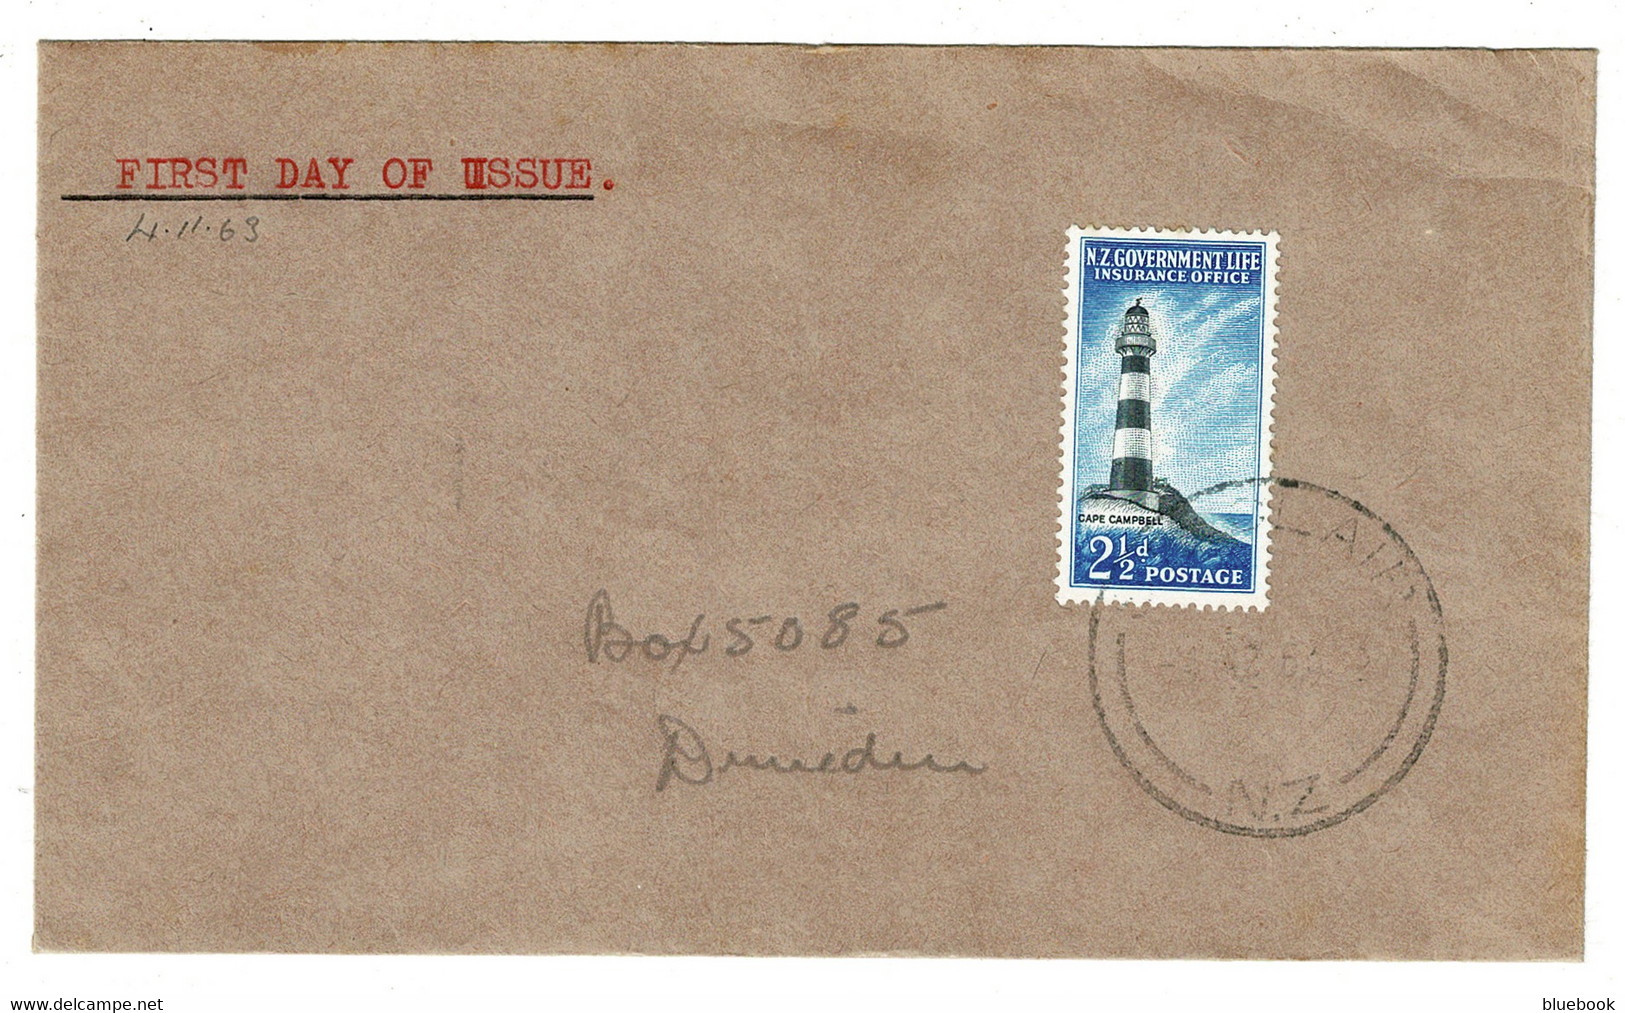 Ref 1553 -  1963 New Zealand FDC First Day Cover - Life Insurance Office SG L45 St Clair Pmk - Lighthouse Stamp - Covers & Documents